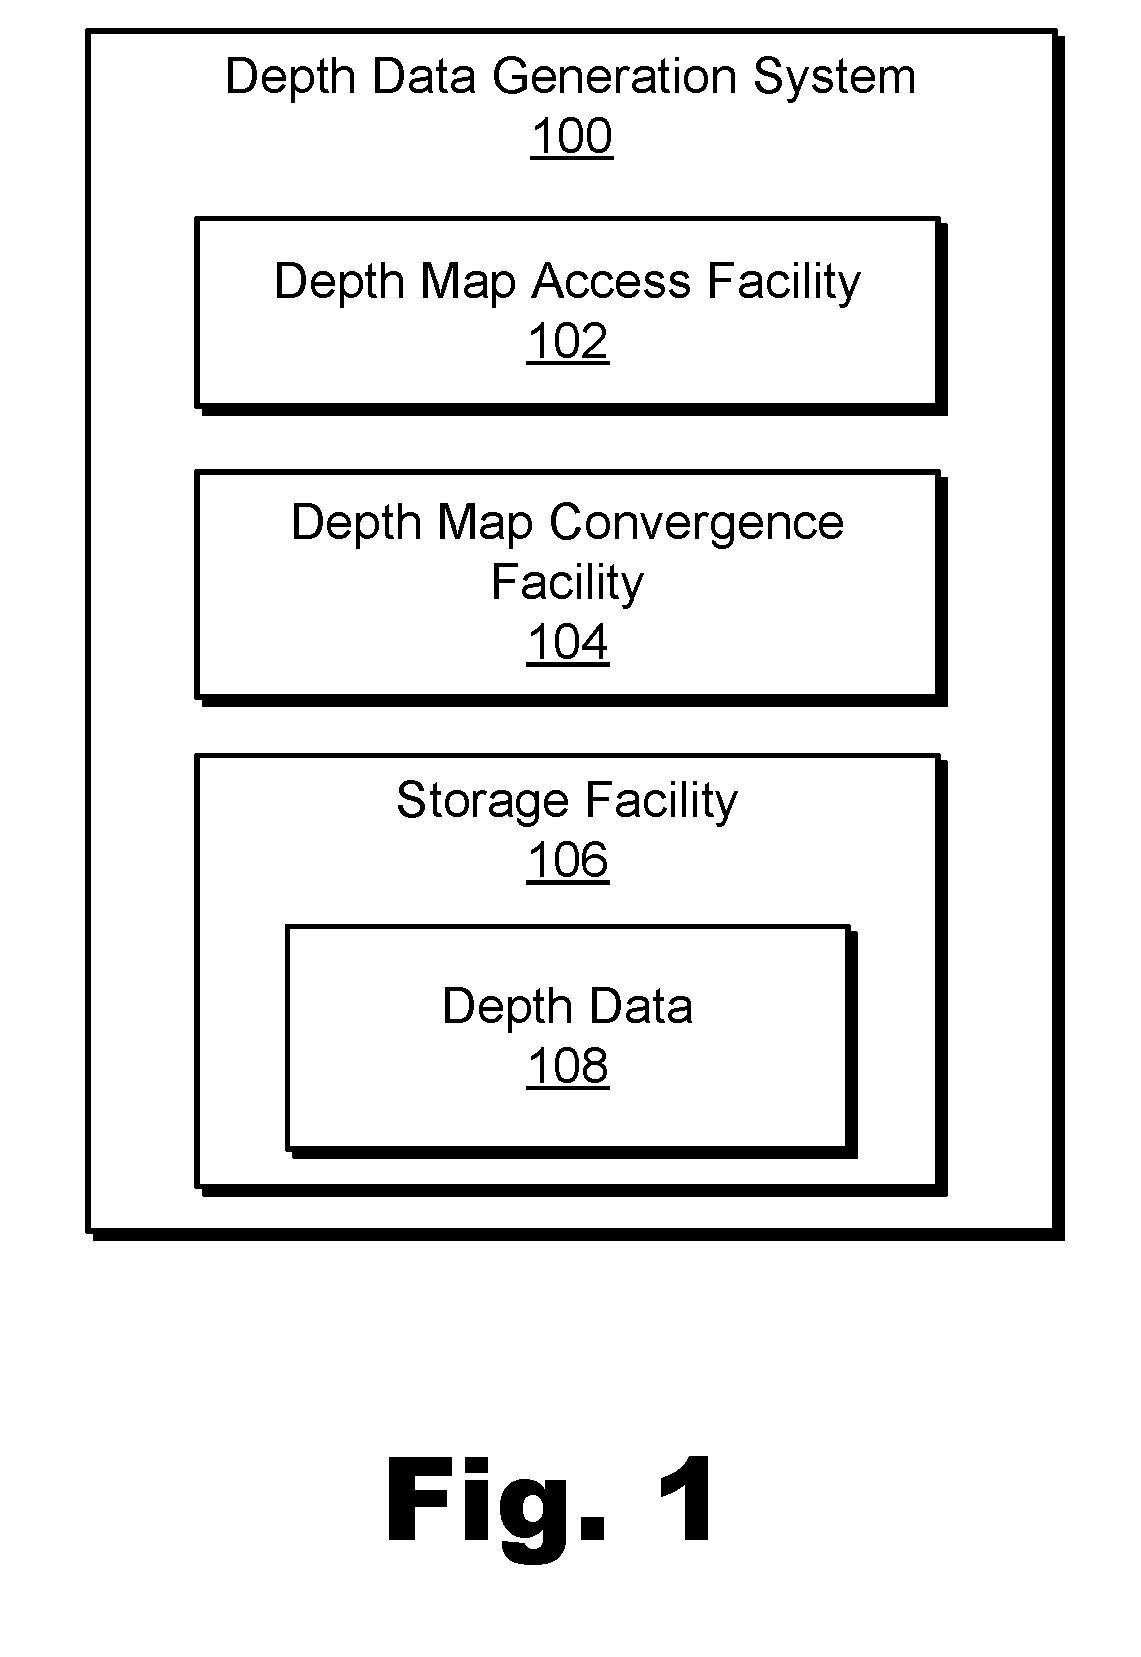 Methods and Systems for Generating Depth Data by Converging Independently-Captured Depth Maps